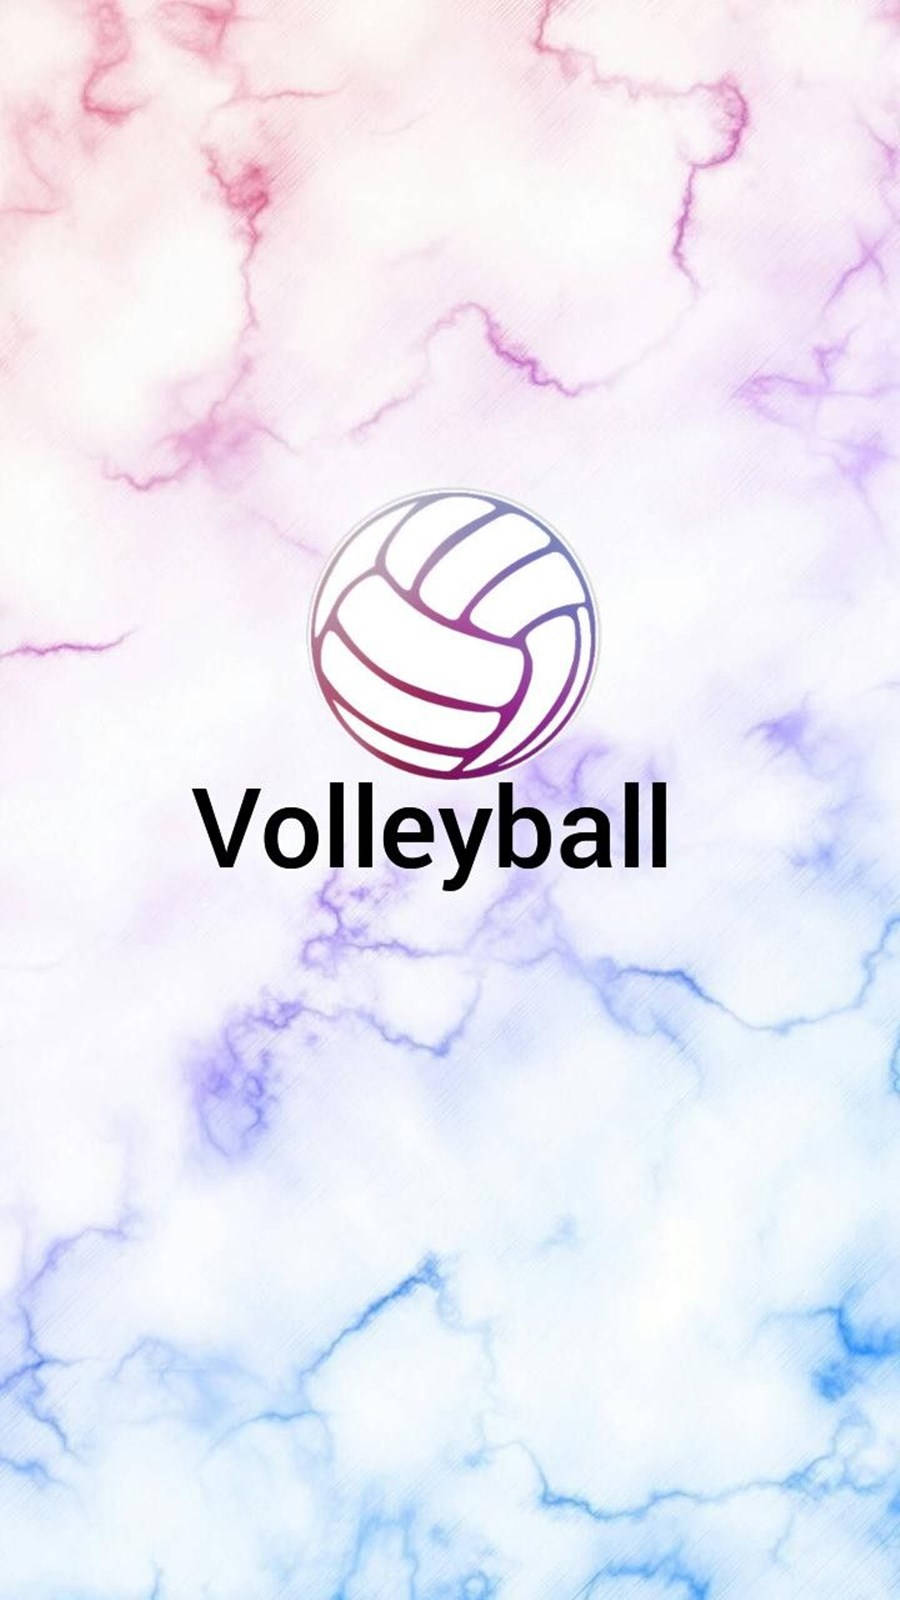 Volleyball Aesthetic Marbled Background Wallpaper